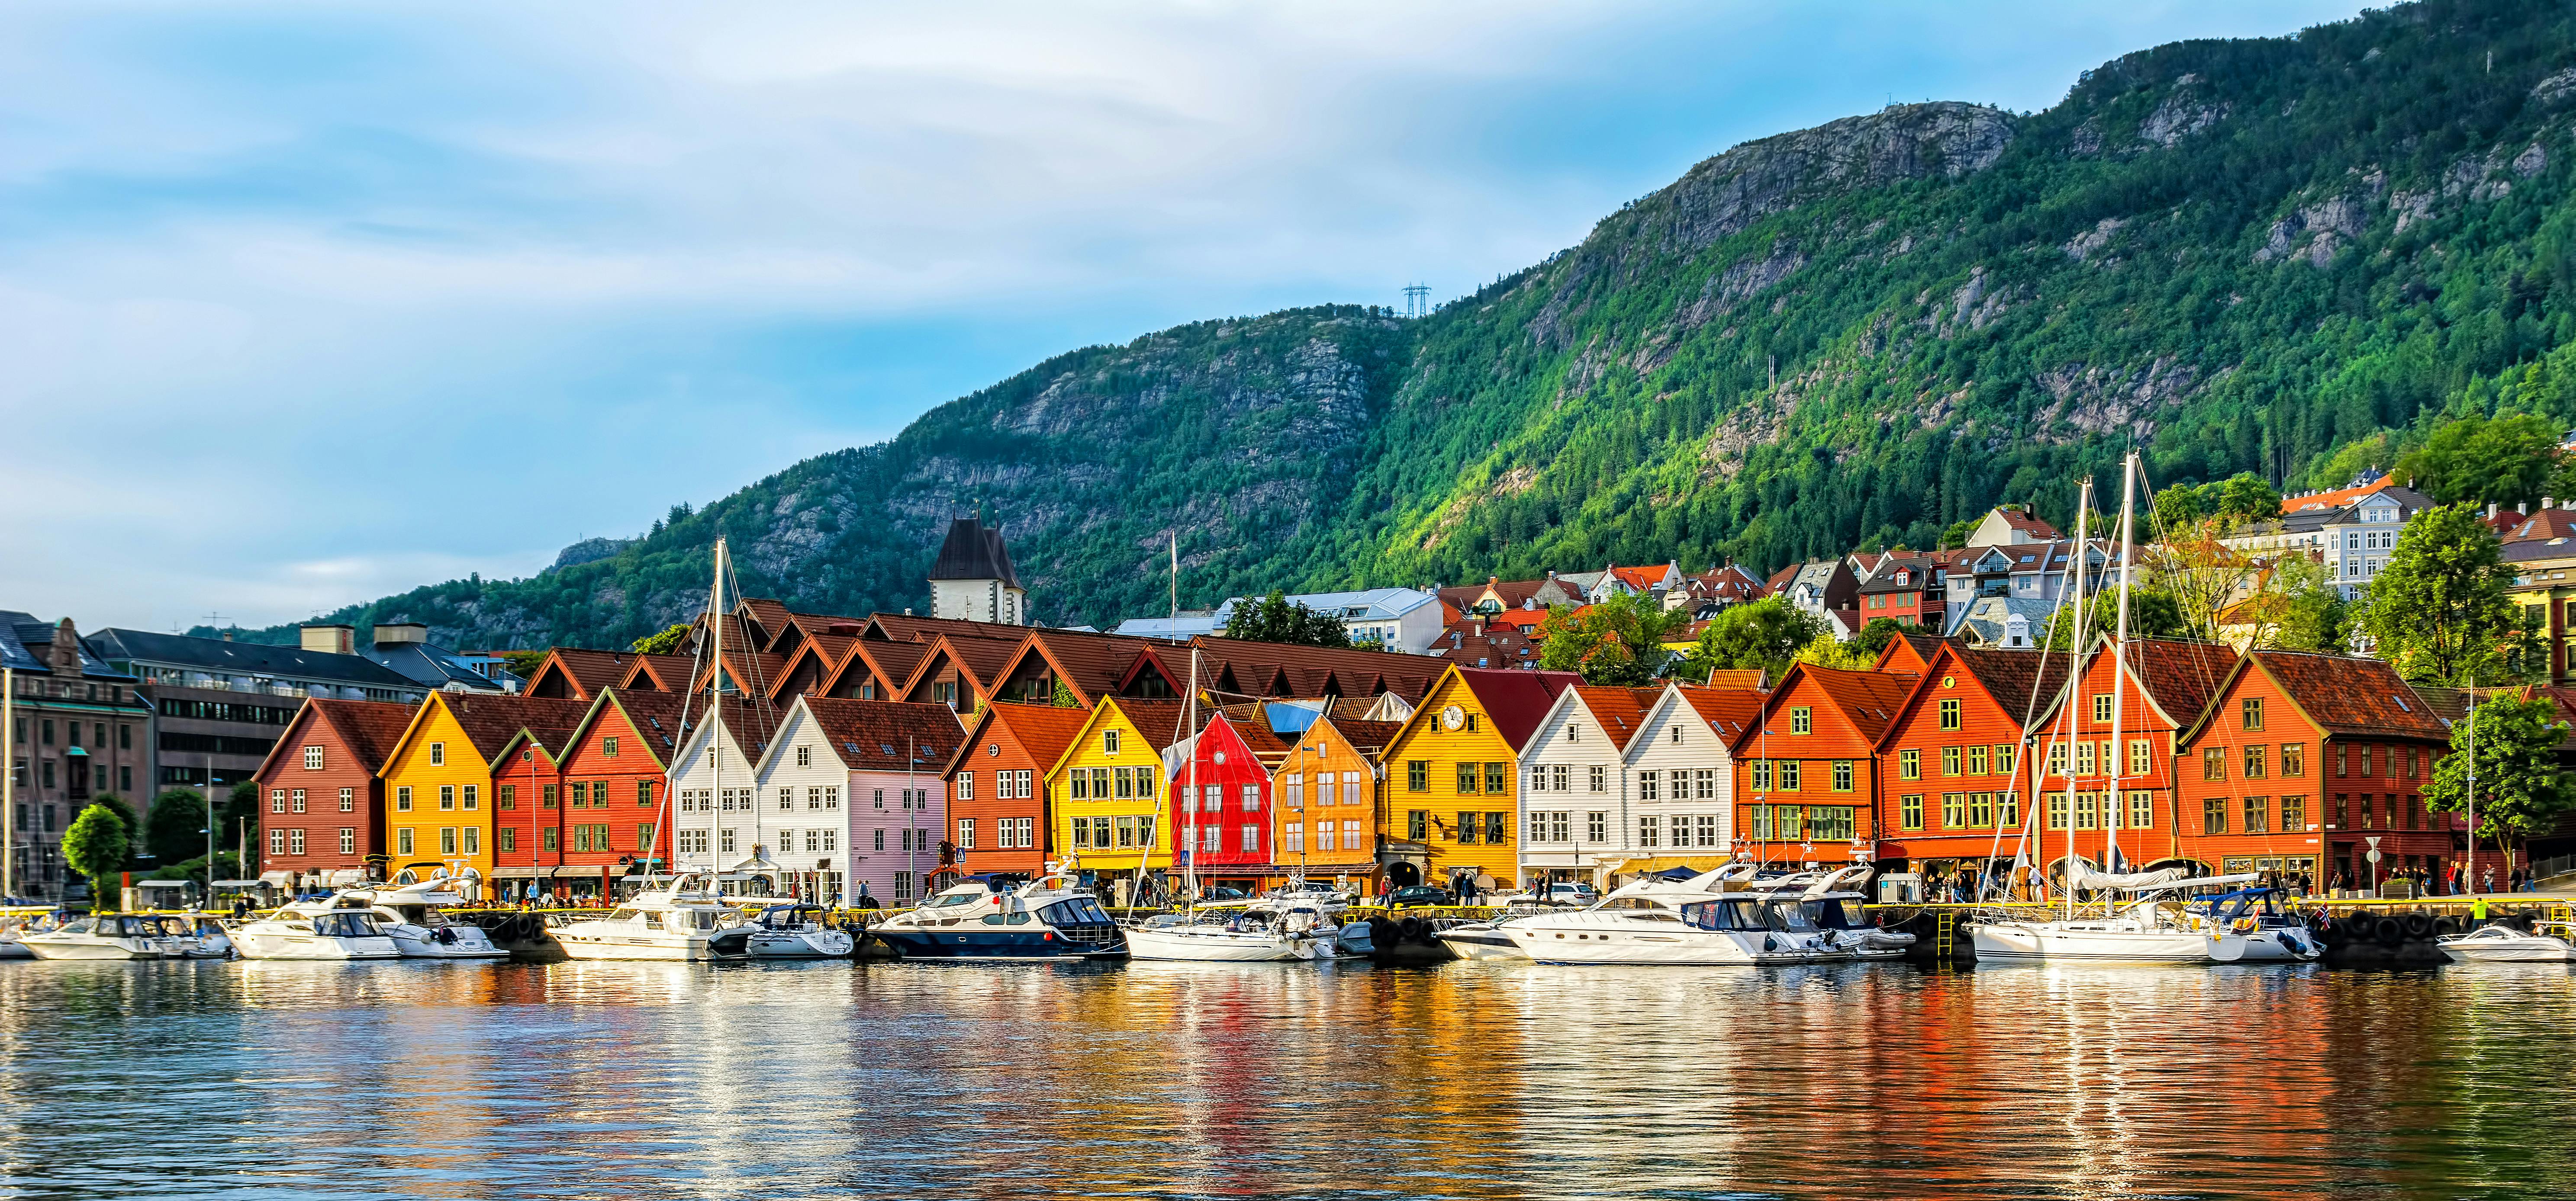 Self guided round trip tour from Bergen Musement